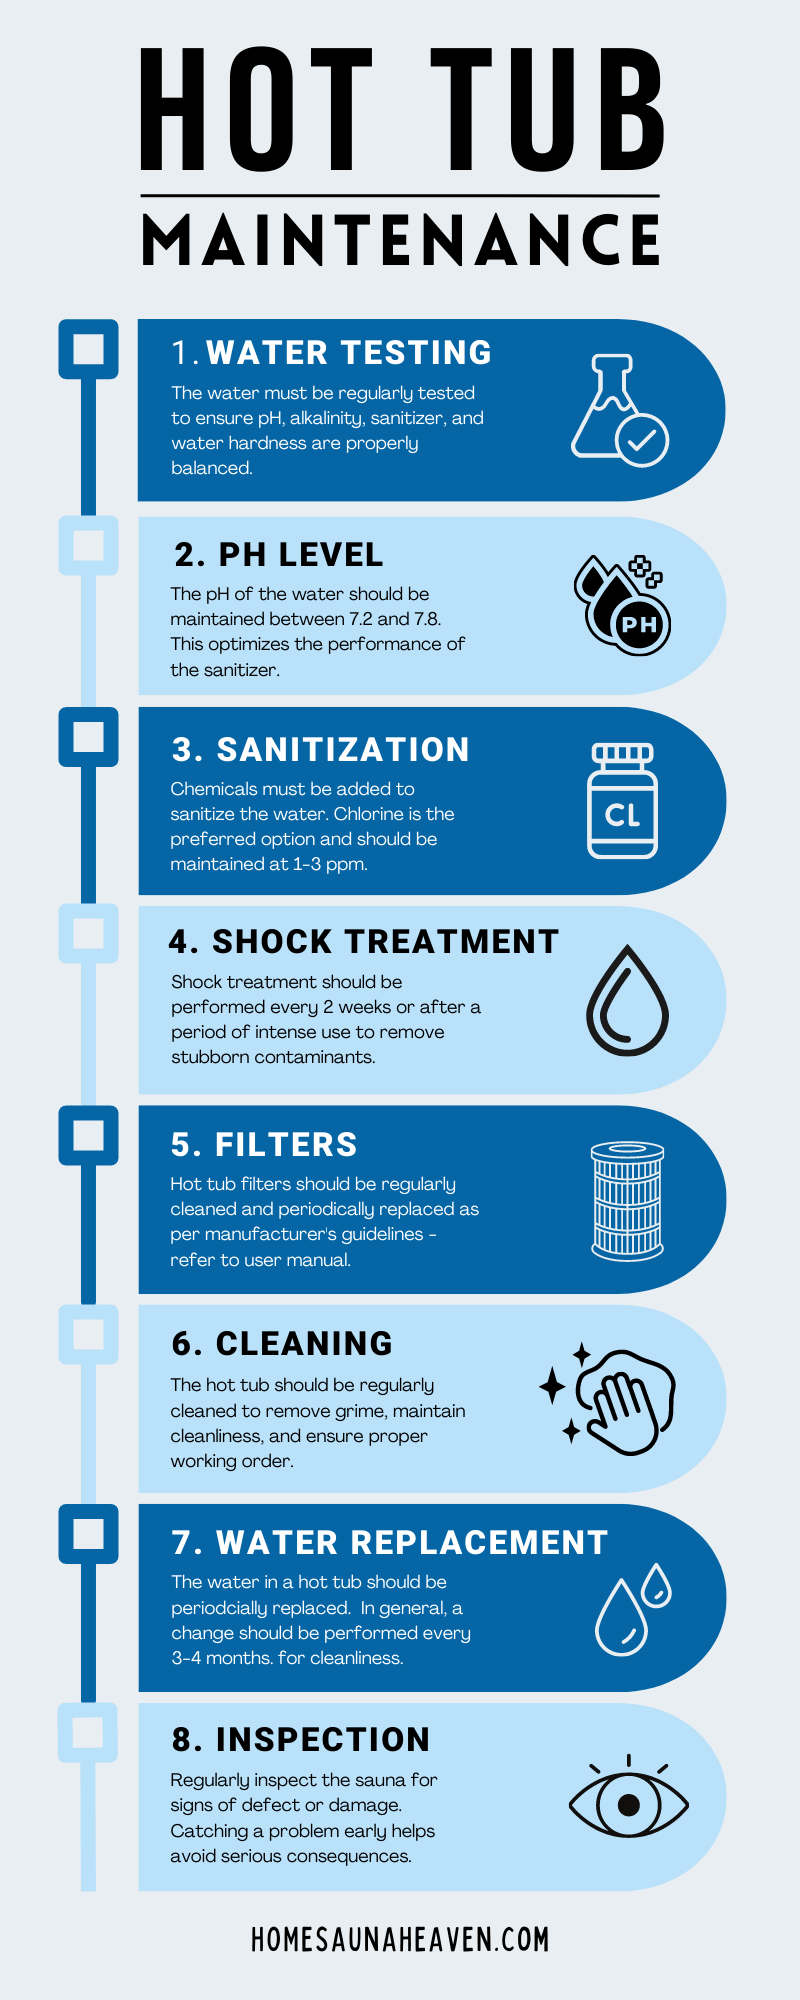 hot tub maintenance infographic overview in 8 steps